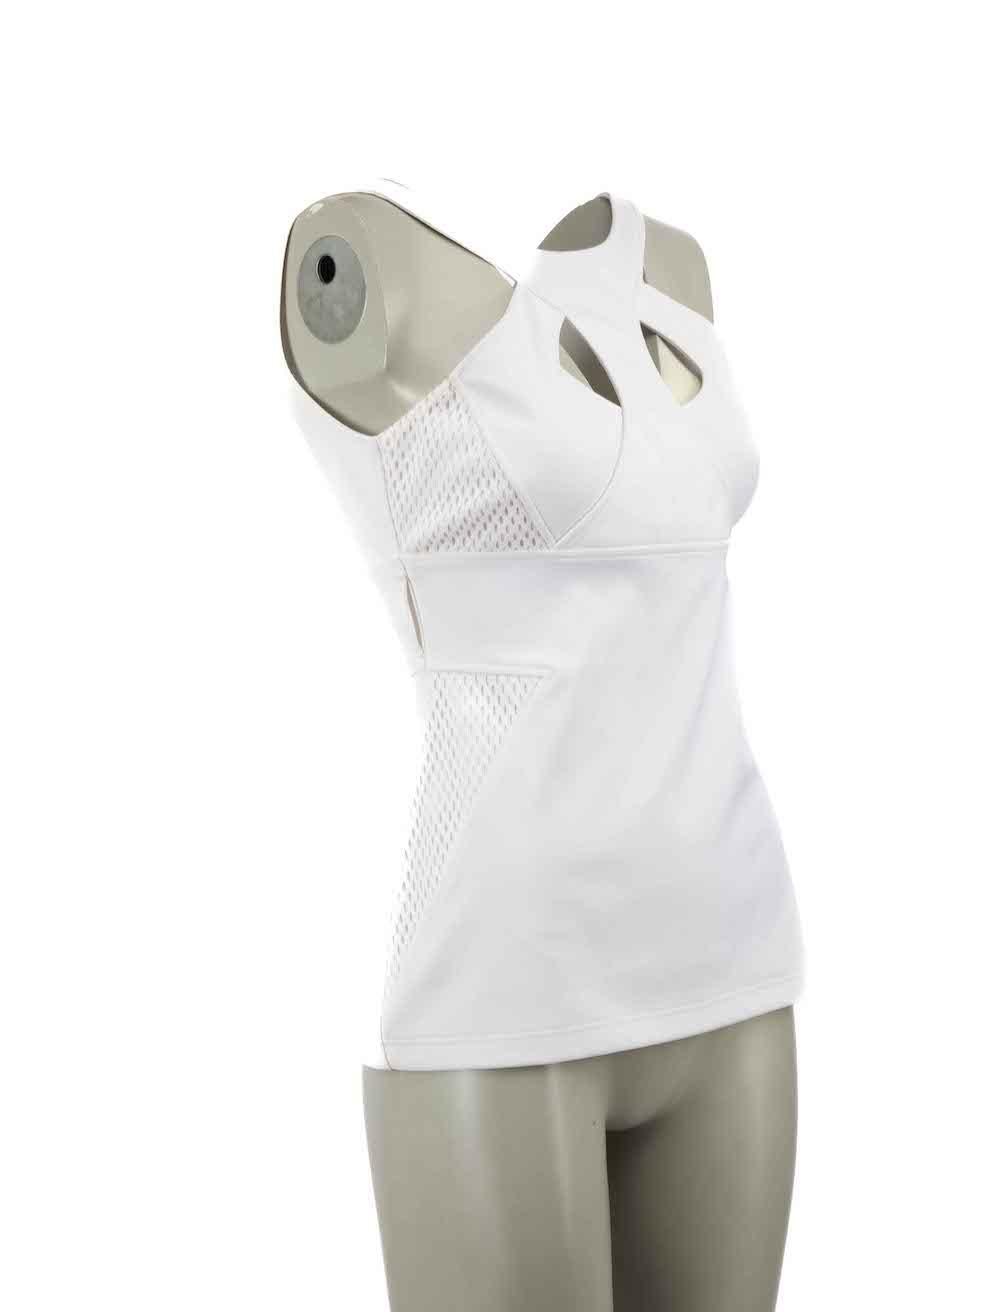 CONDITION is Very good. Minimal wear to top is evident. Minimal wear to the front with light markings on this used Gucci designer resale item.

Details
White
Synthetic
Race tank top
Mesh panels
Cut outs
Side zip fastening
Made in Italy